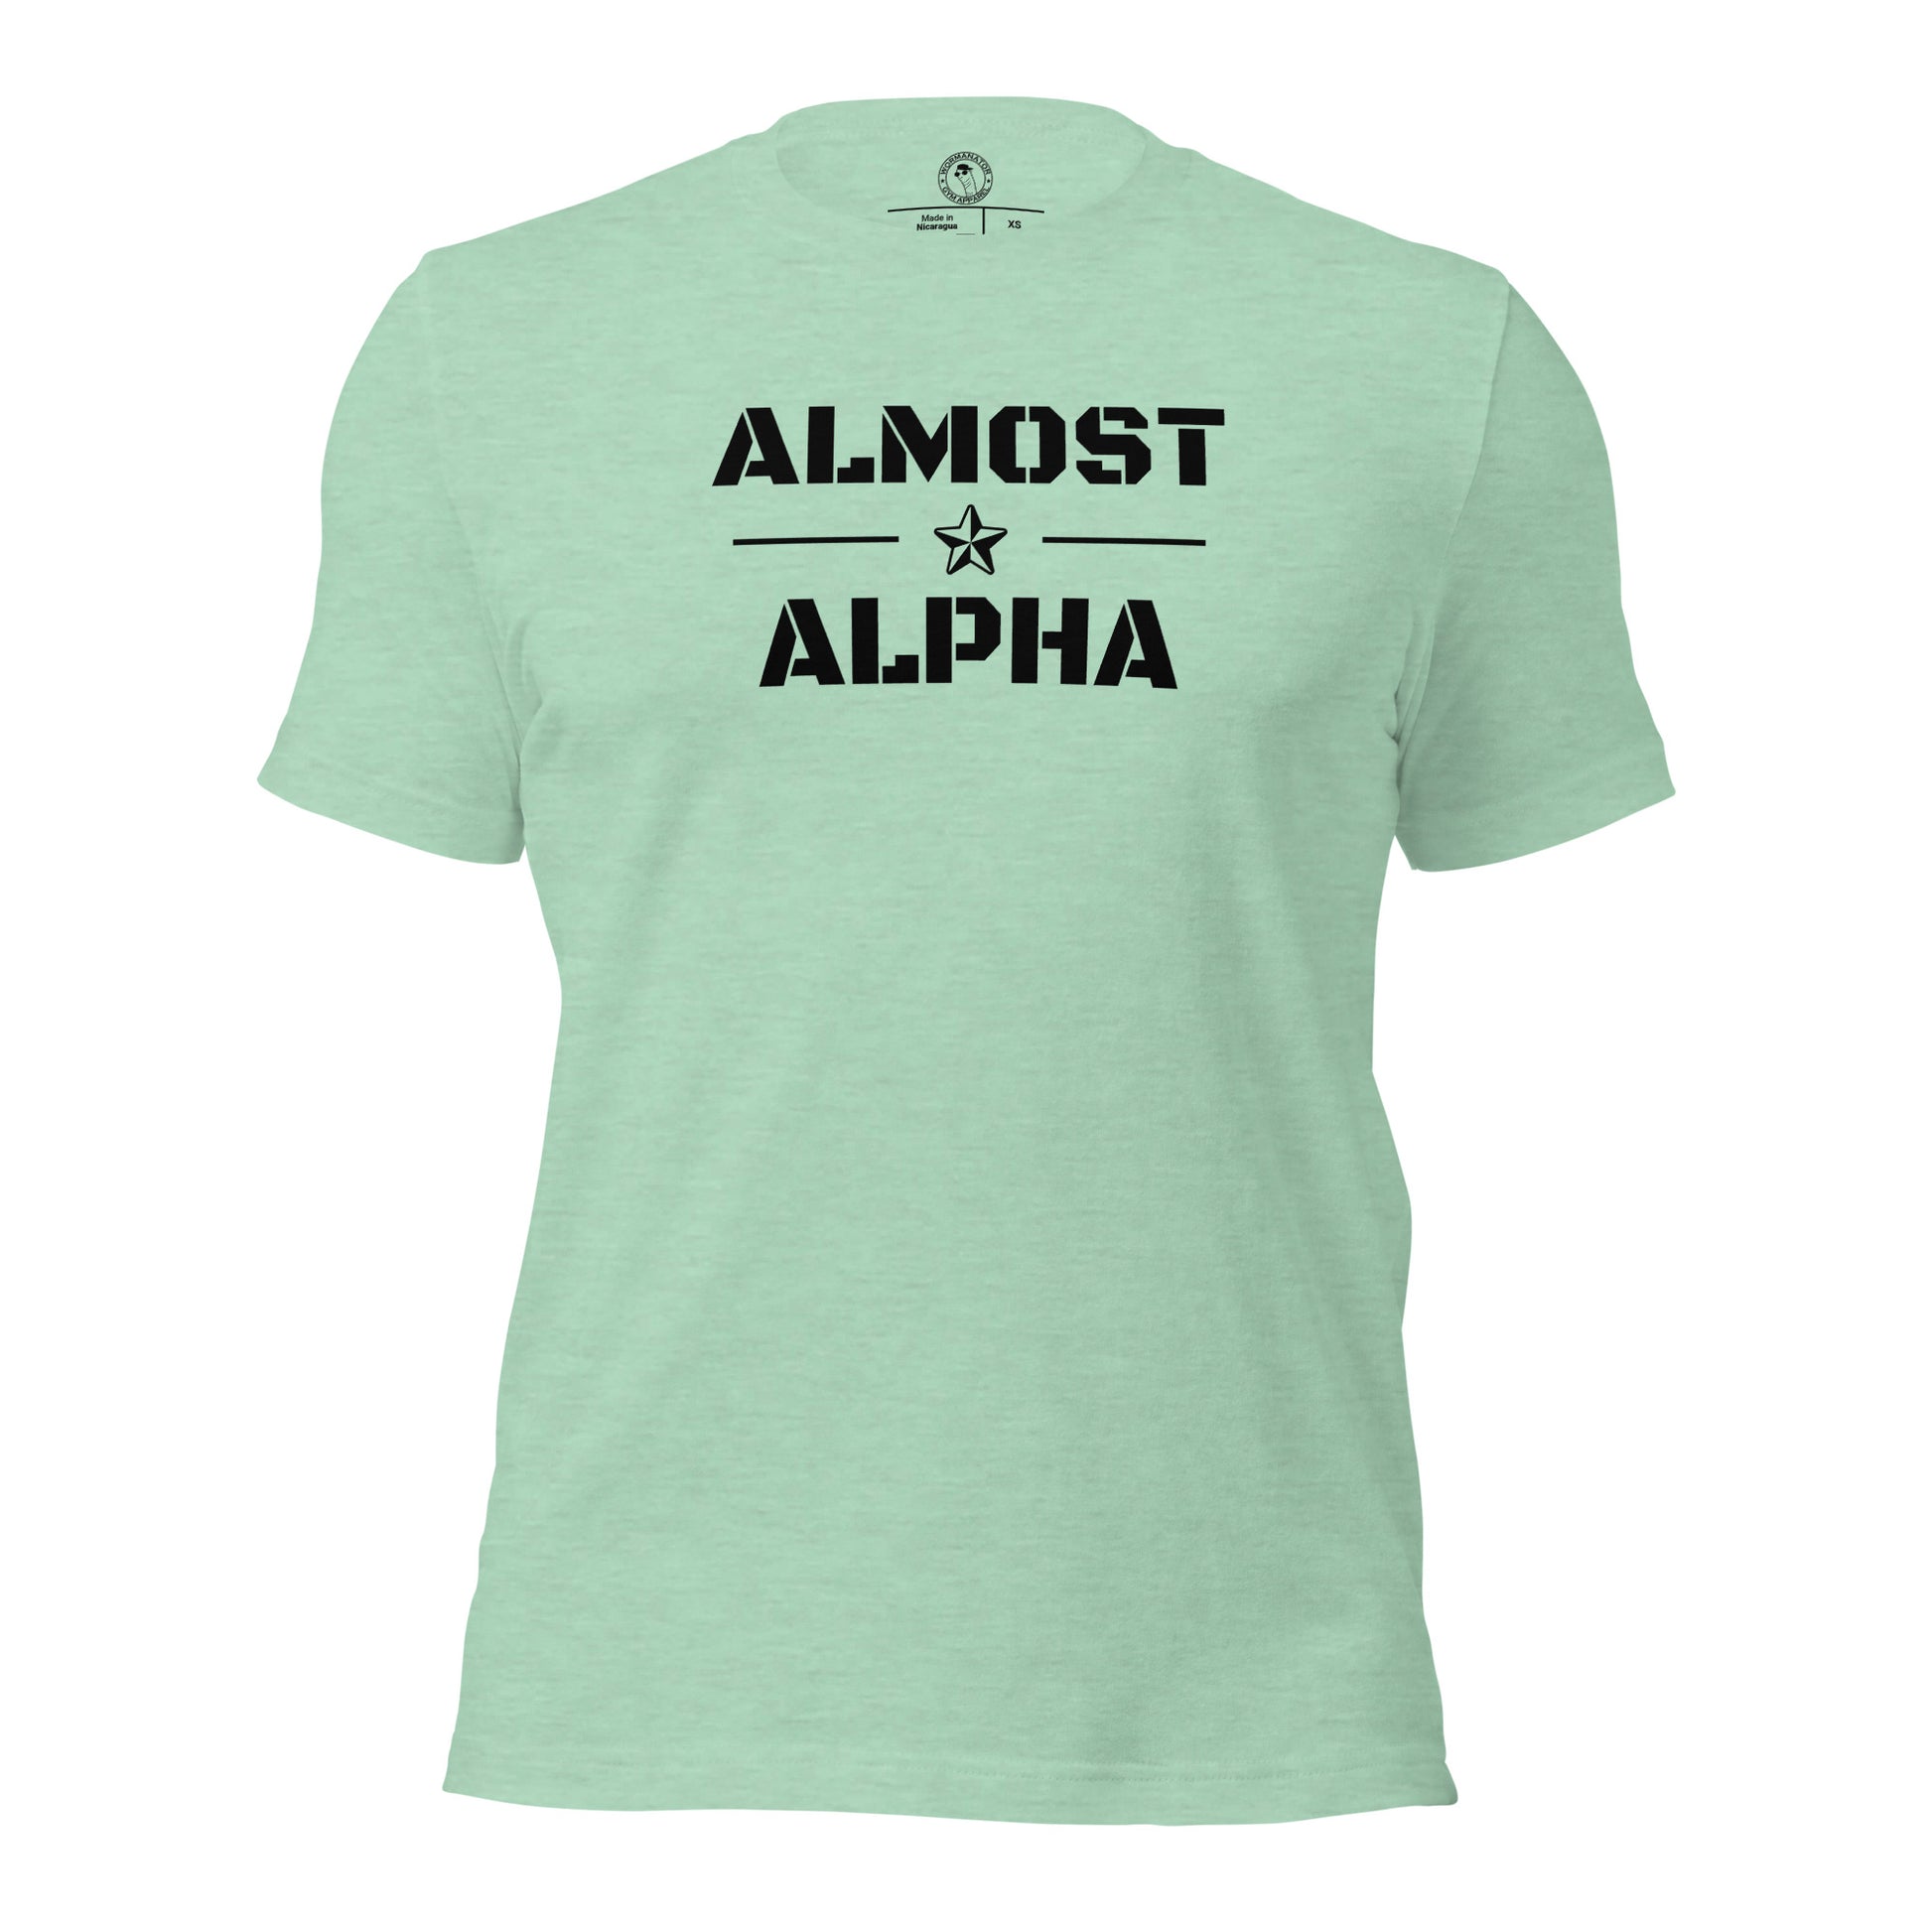 Almost Alpha Shirt in Heather Prism Mint